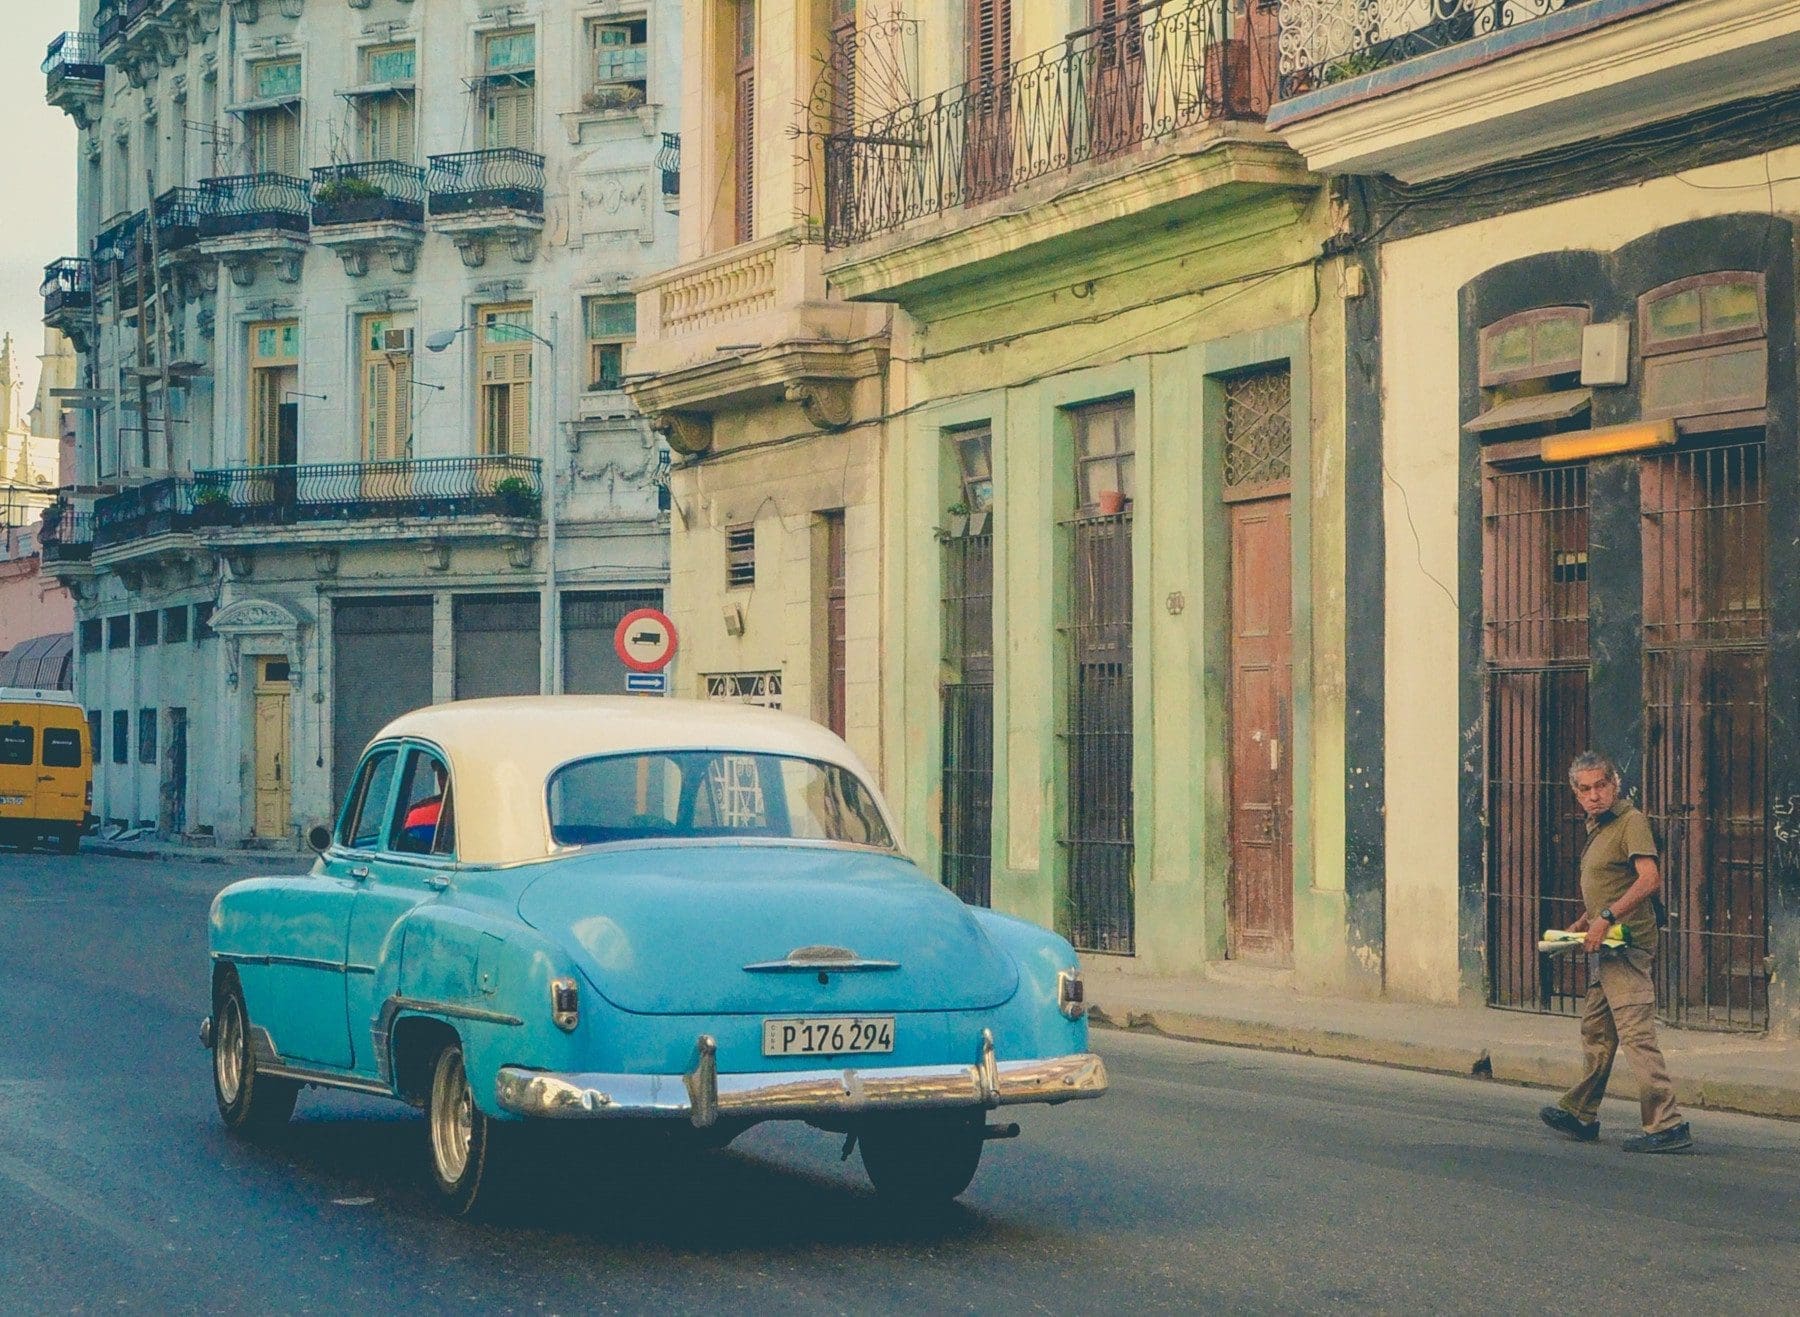 Top 5 Things to Do in Cuba